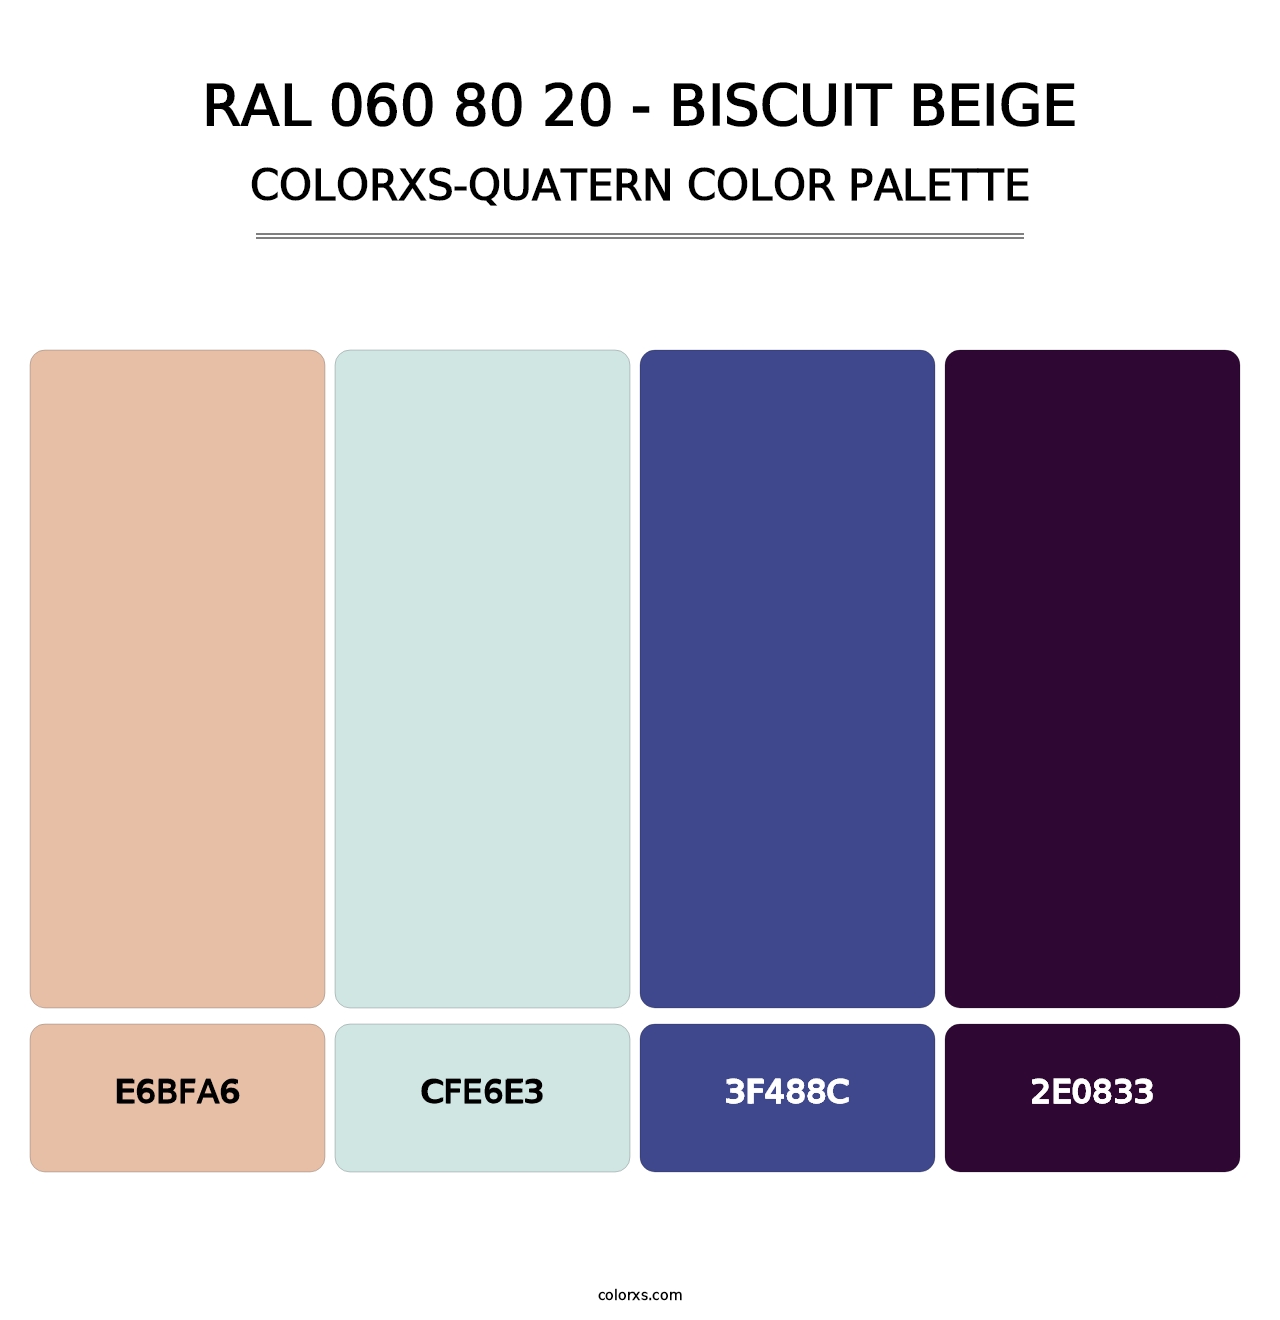 RAL 060 80 20 - Biscuit Beige - Colorxs Quatern Palette